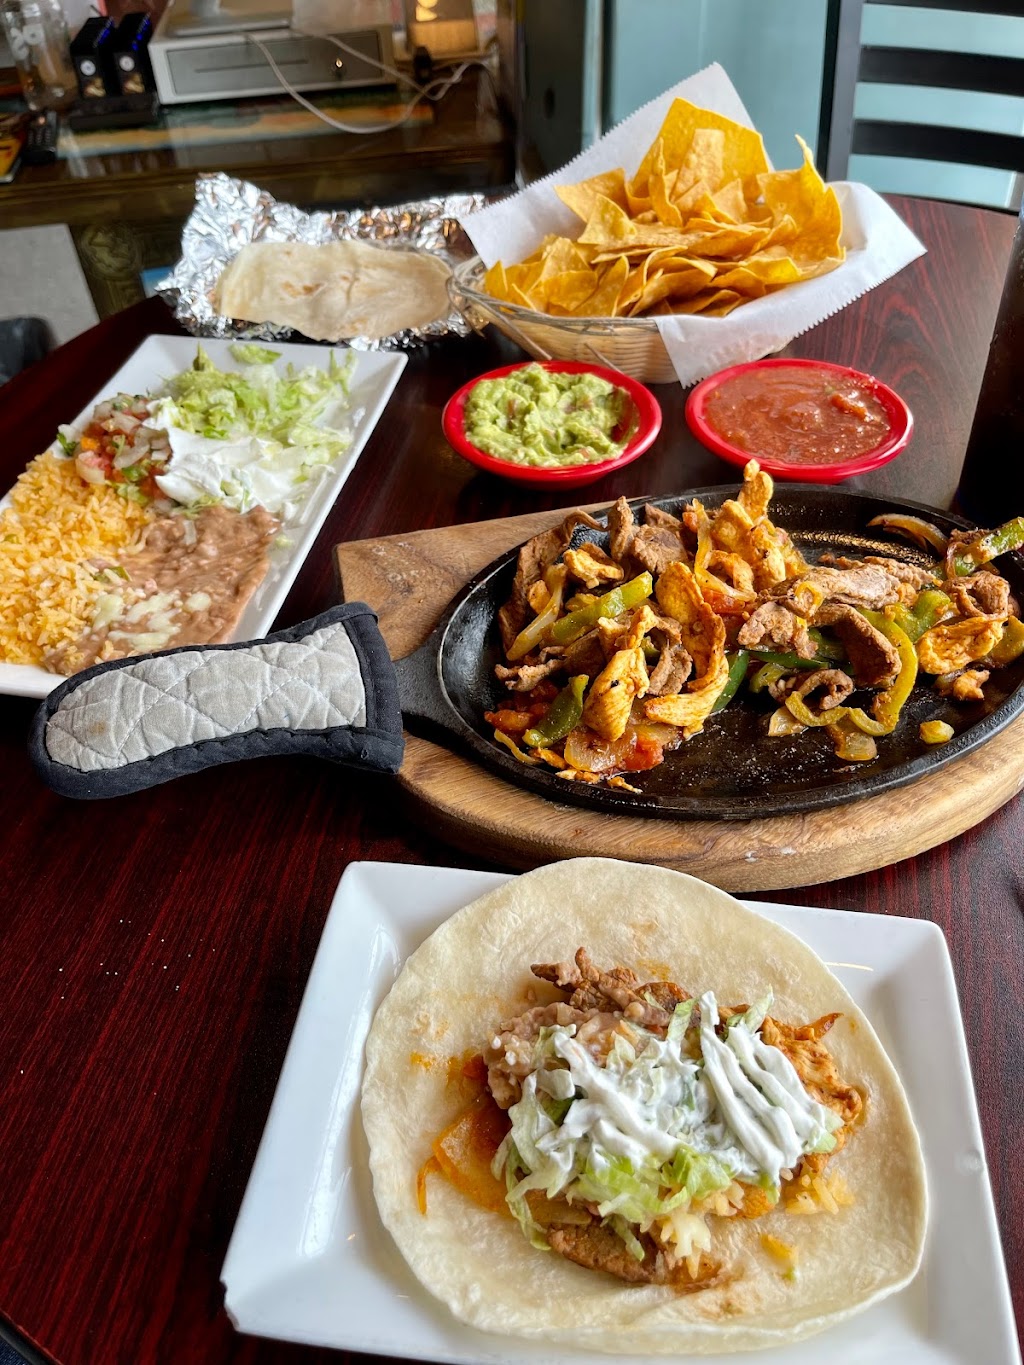 Mr Panchos Mexican Restaurant and Grill | 119 East Gate Plaza, East Alton, IL 62024, USA | Phone: (618) 216-3444